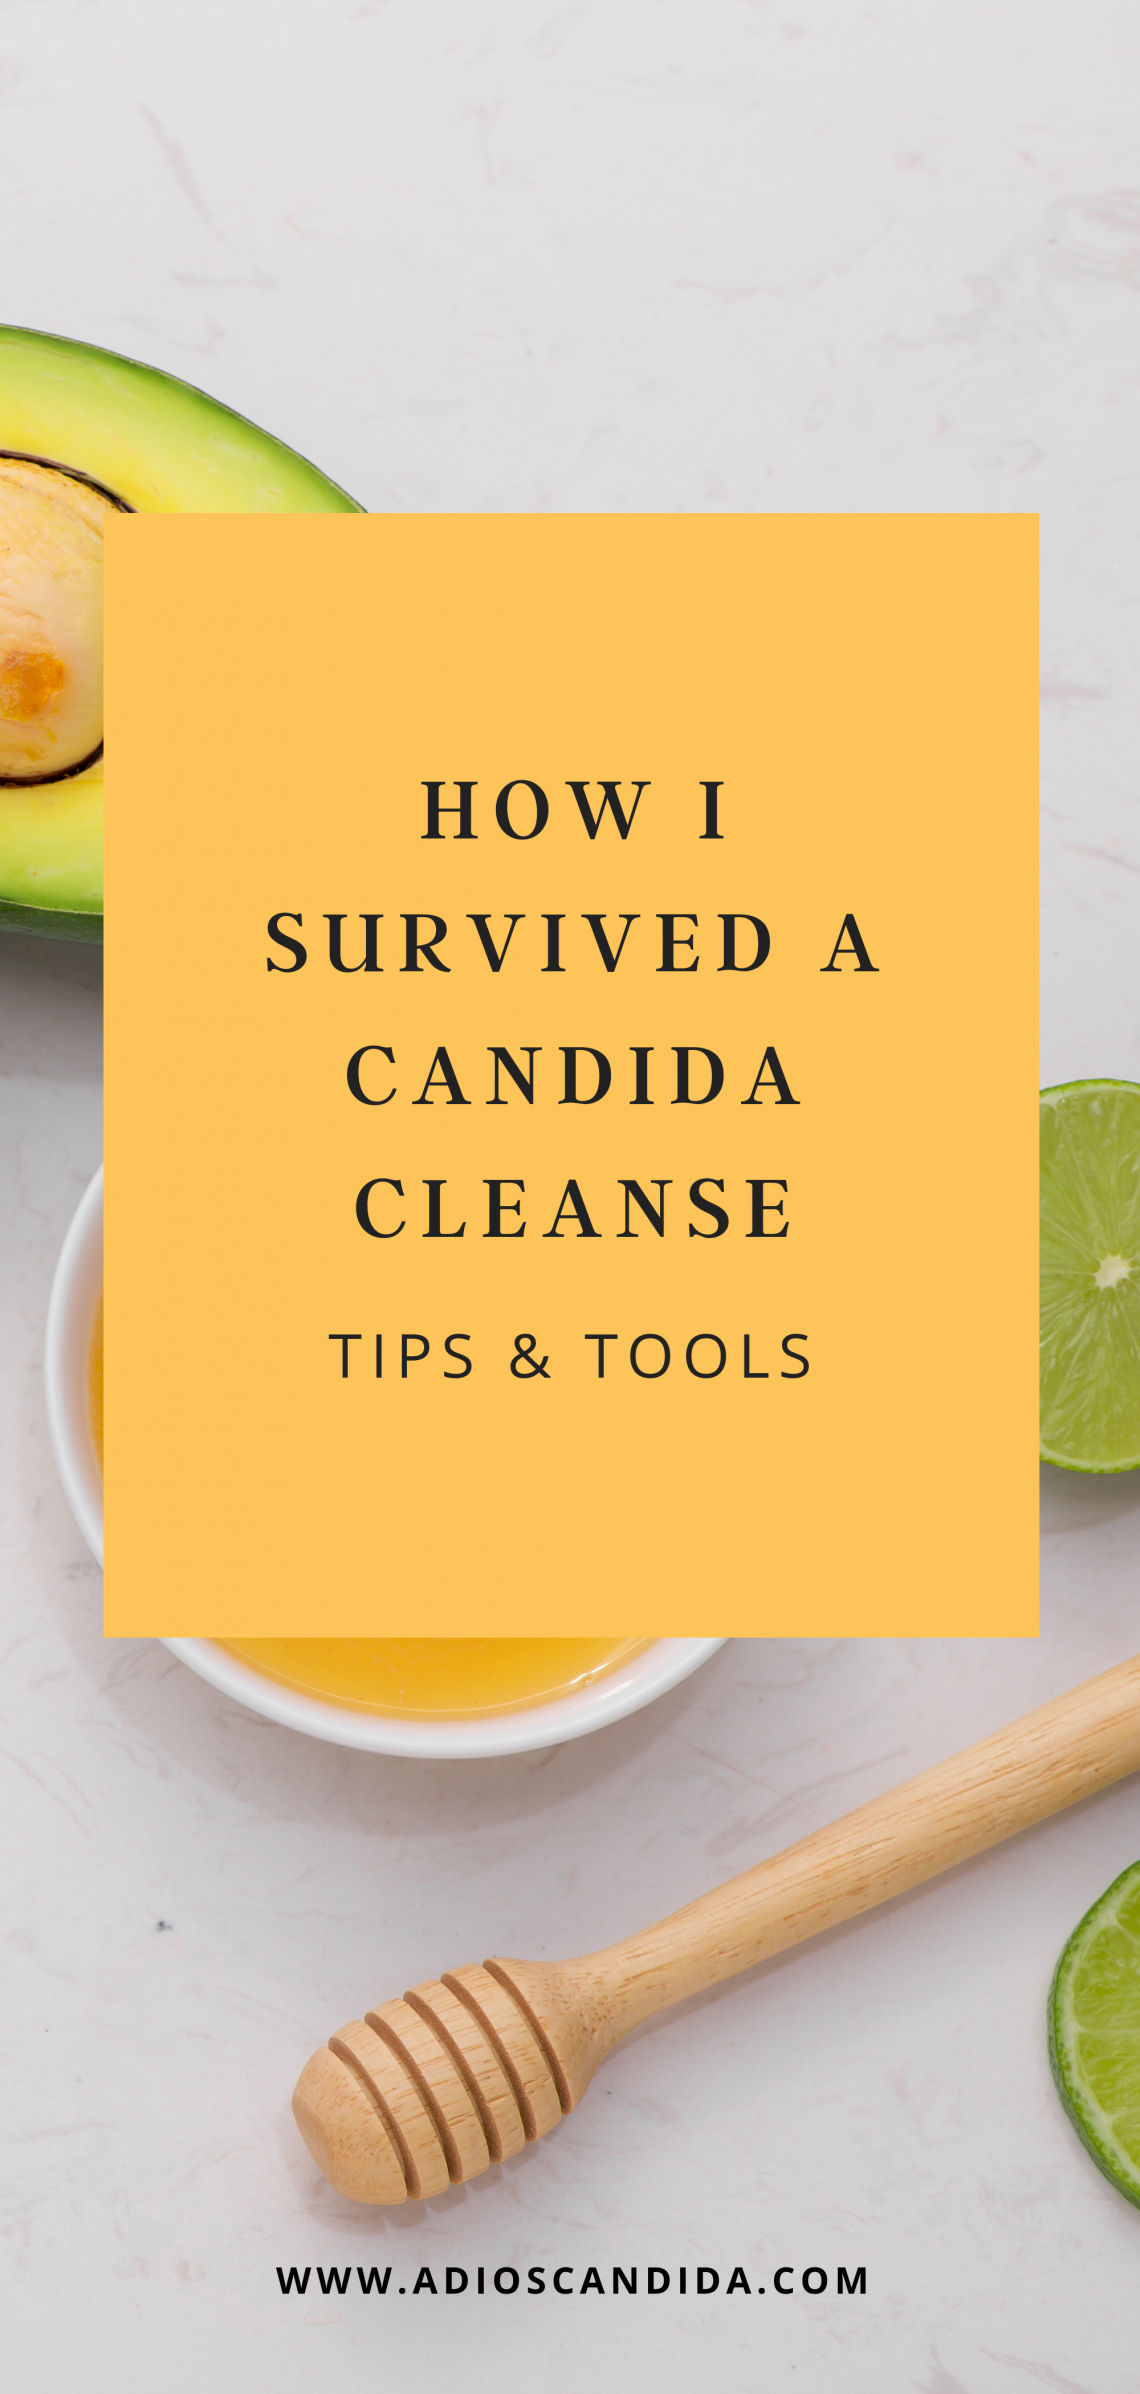 How I survived a candida cleanse - Adios Candida -   17 diet Body cleanses ideas